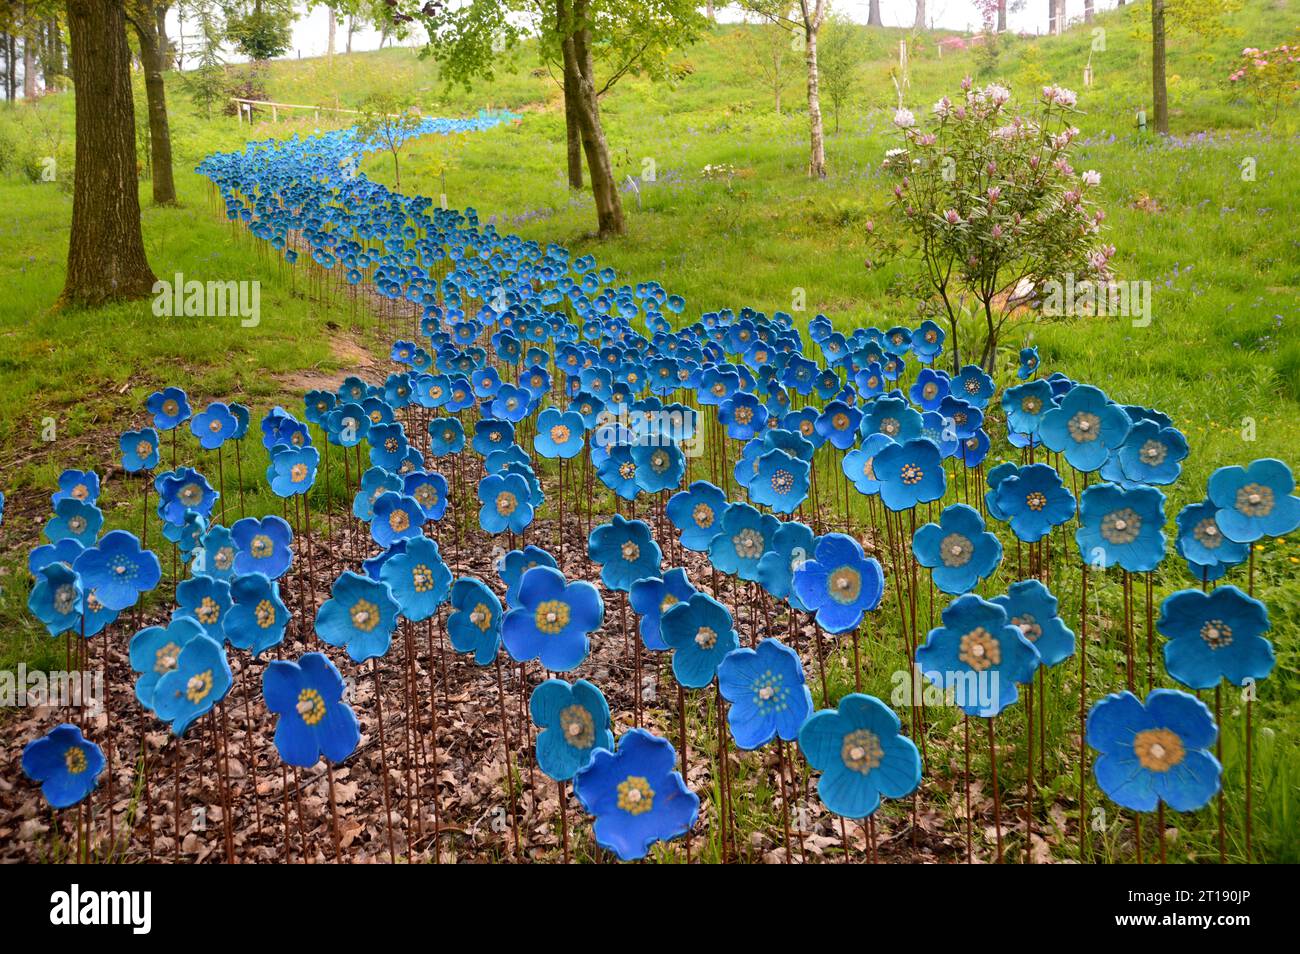 Hand Painted Ceramic Sculptures of Himalayan Blue Poppies by Artist  Anna Whitehouse on Display in the Himalayan Garden & Sculpture Park. England, UK. Stock Photo